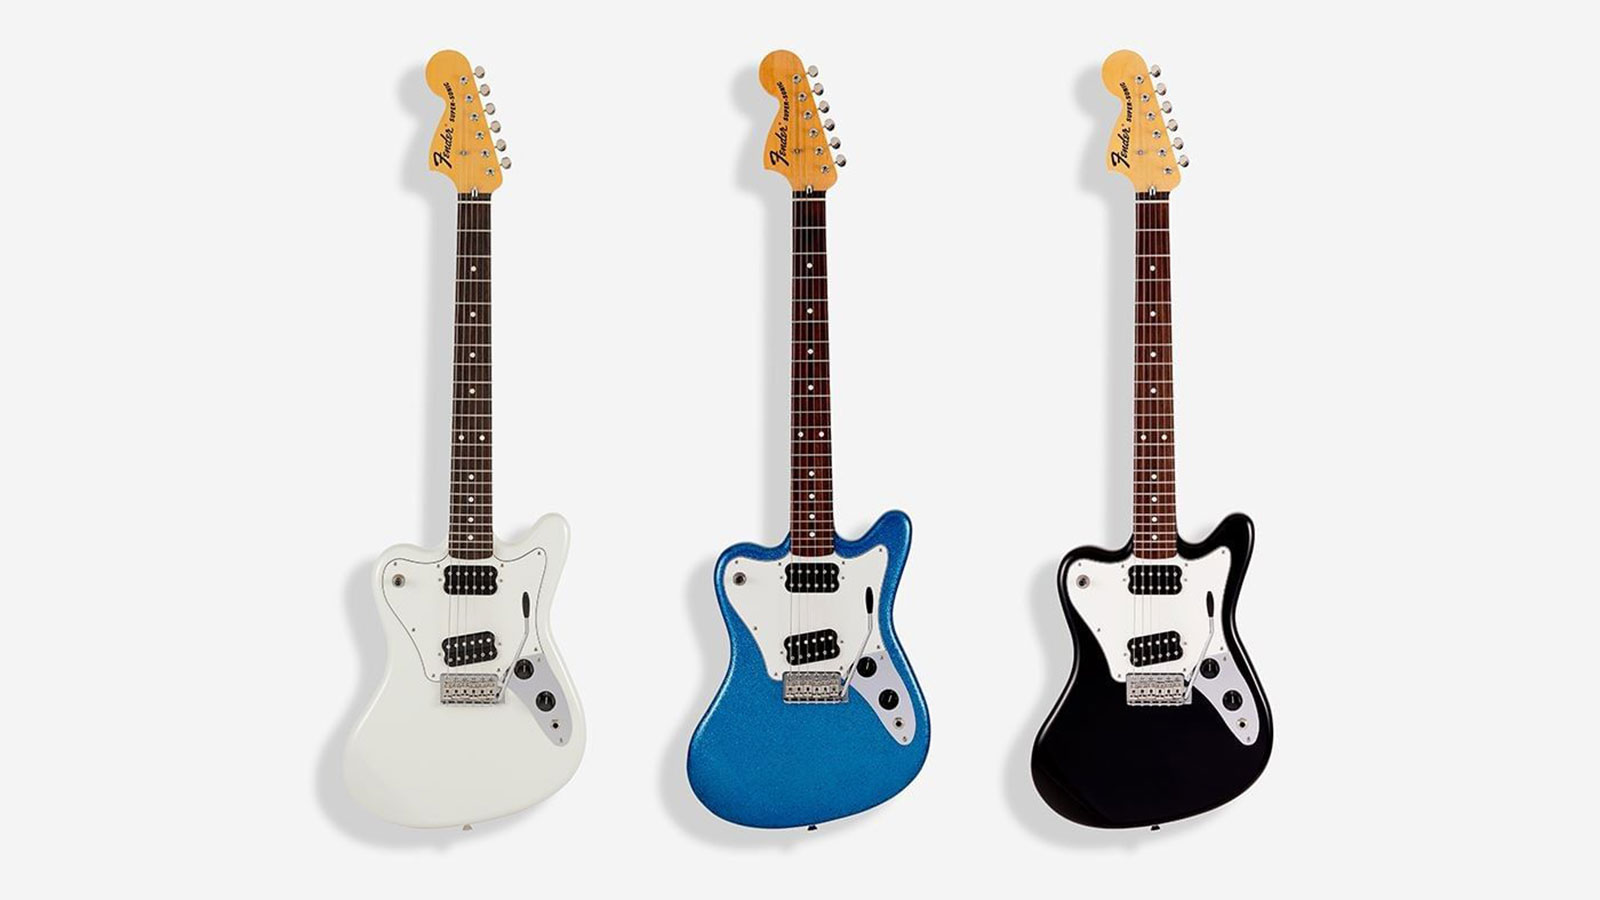 Fender Japan is reprising the Super-Sonic shape for a new limited 